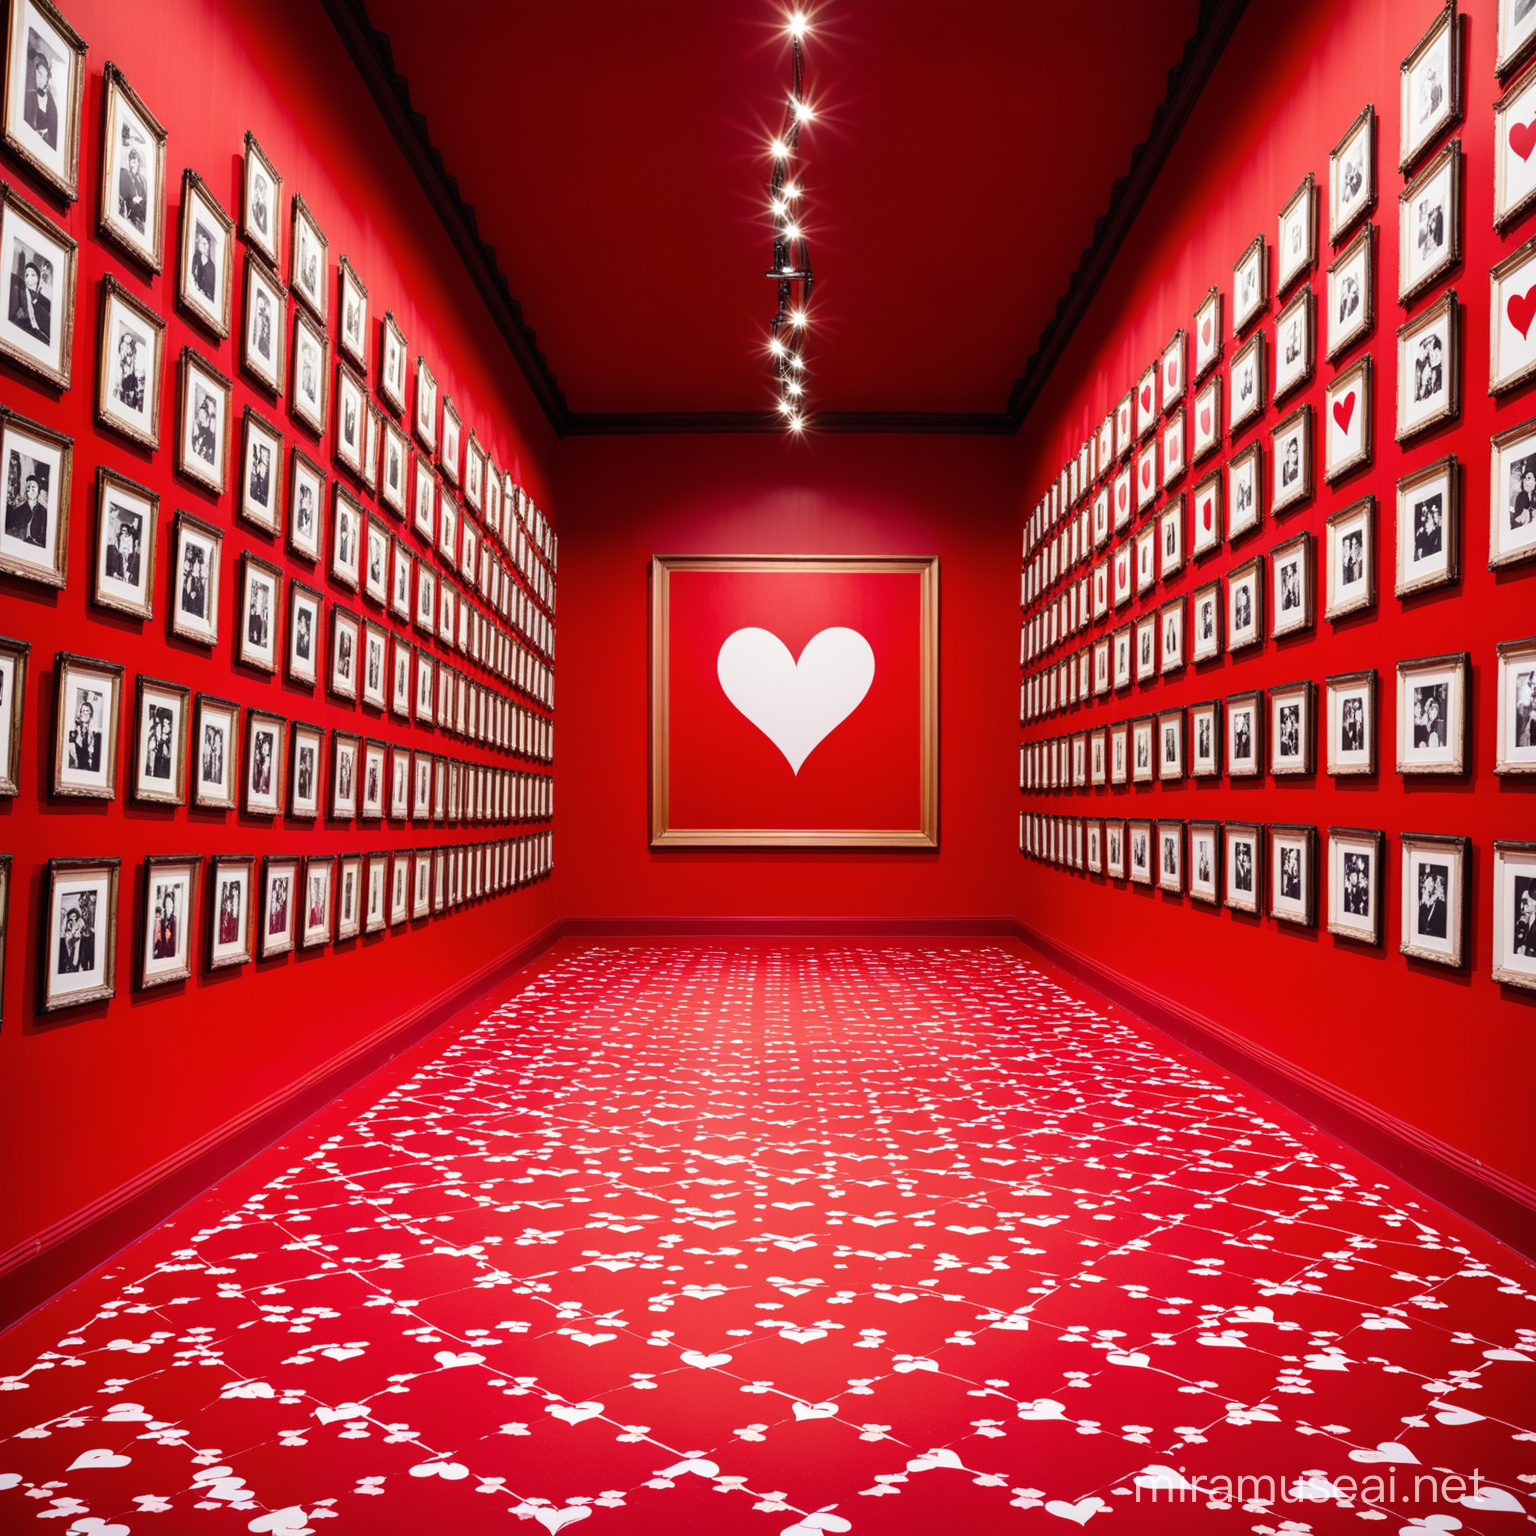 Vibrant Red Room with HeartFilled Frames